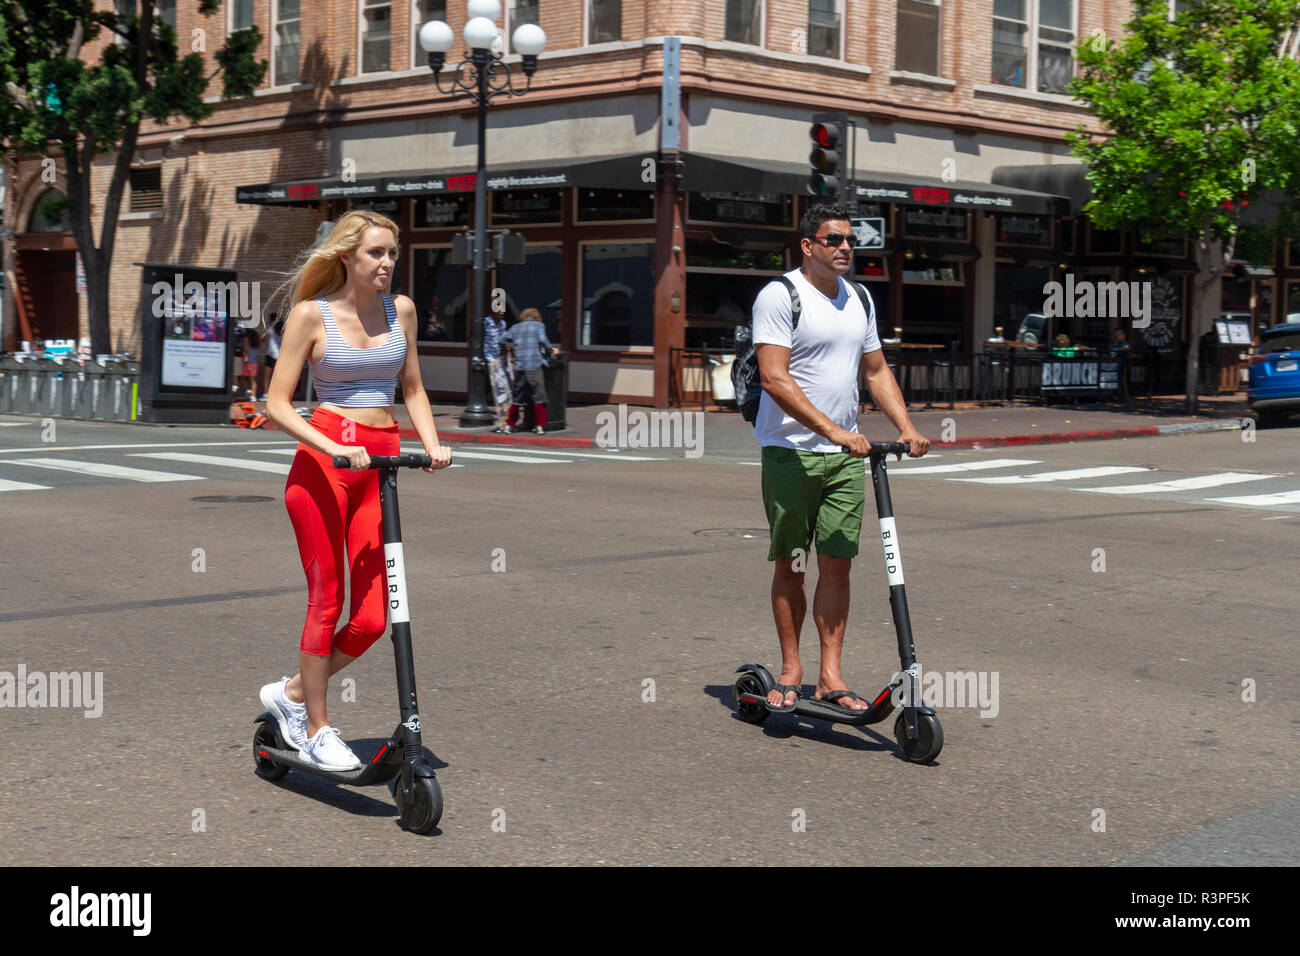 Two people riding 'Bird' electric scooters on the road in San Diego, California, United States. Stock Photo